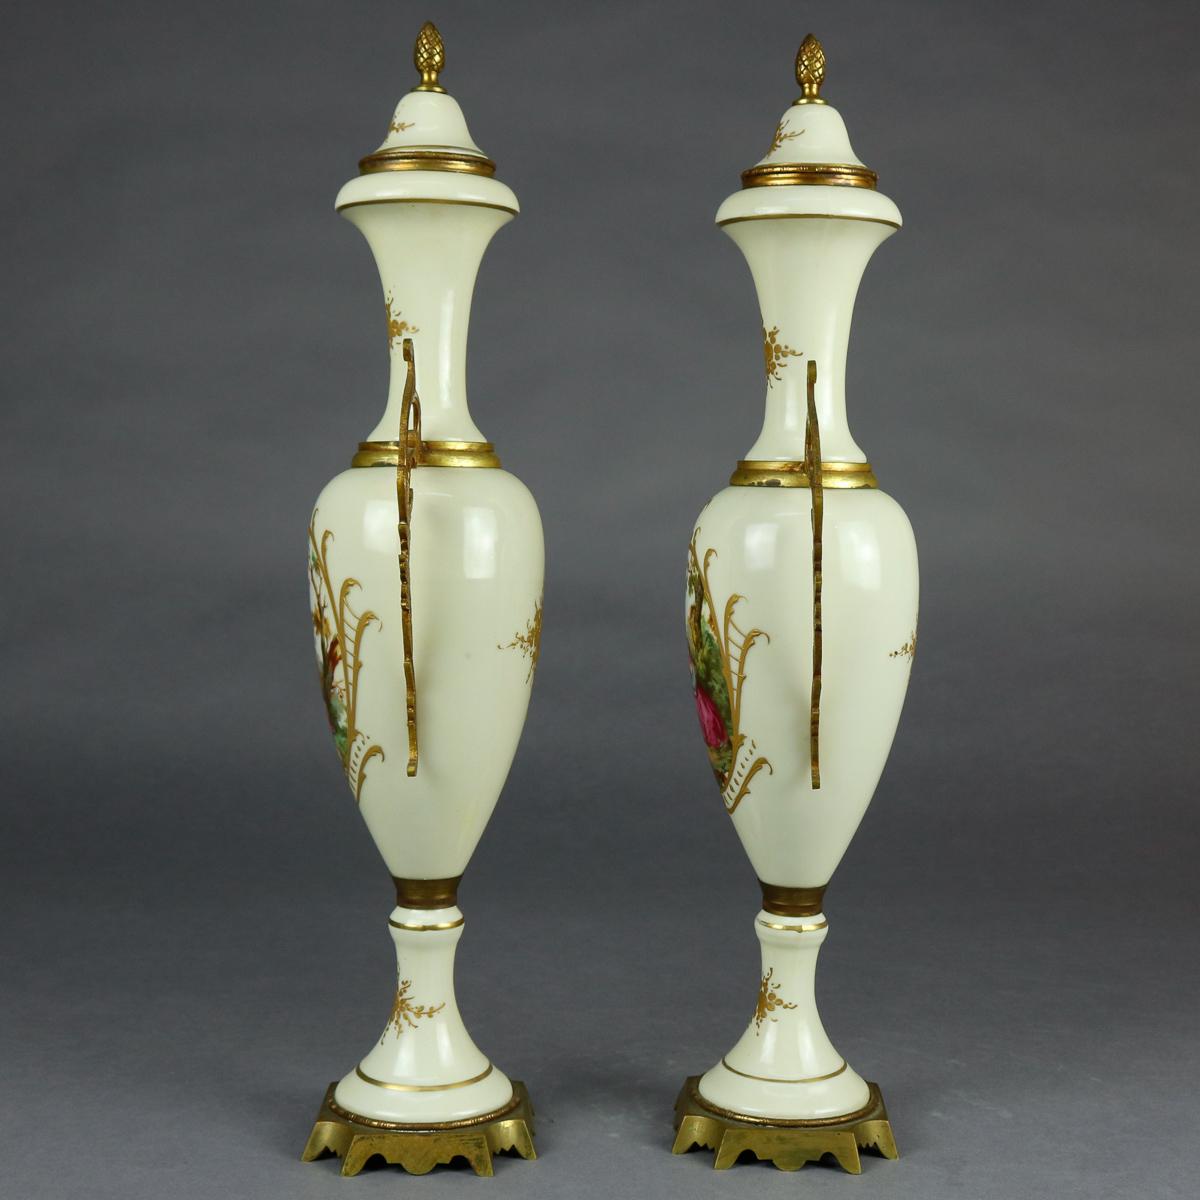 Hand-Painted Antique French Sevres Pictorial Hand Painted and Gilt Porcelain and Bronze Urns